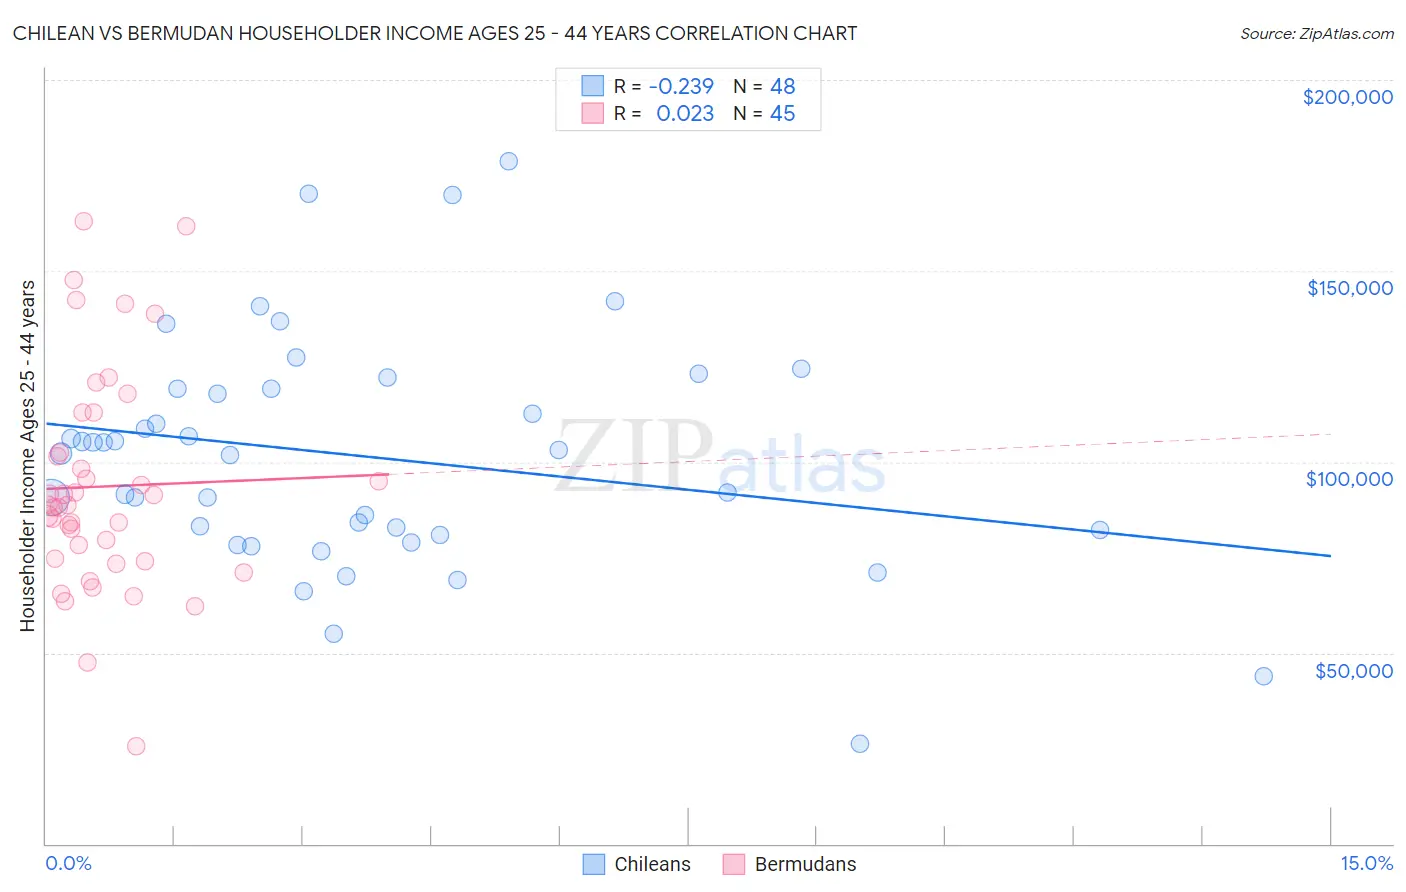 Chilean vs Bermudan Householder Income Ages 25 - 44 years